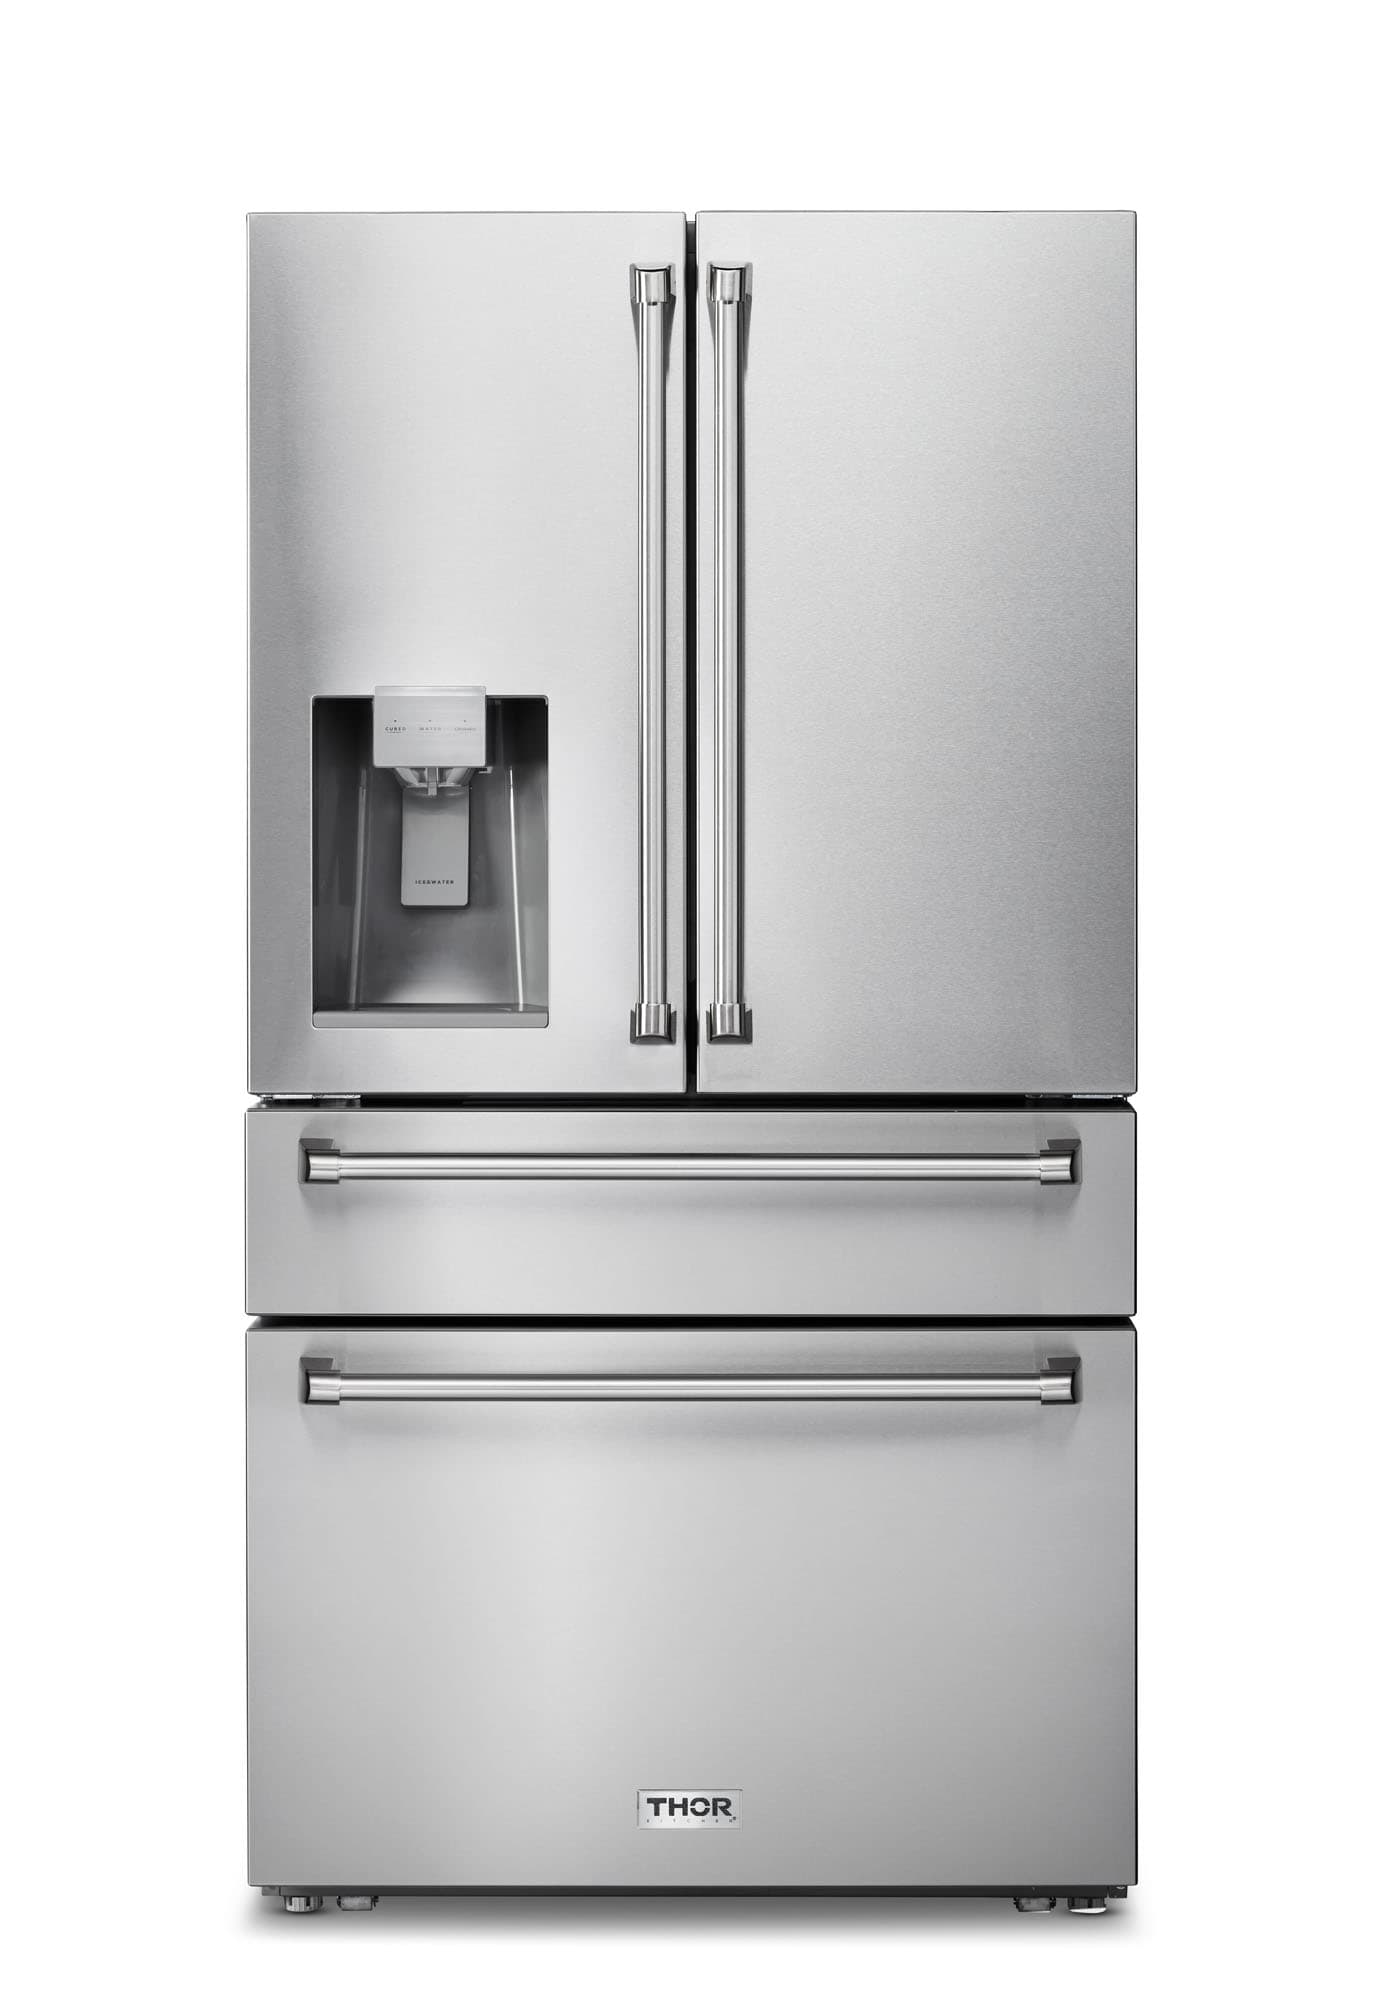 Thor Thor 36in Professional French Door Refrigerator with Ice and Water Dispenser - Model TRF3601FD - Stainless Steel